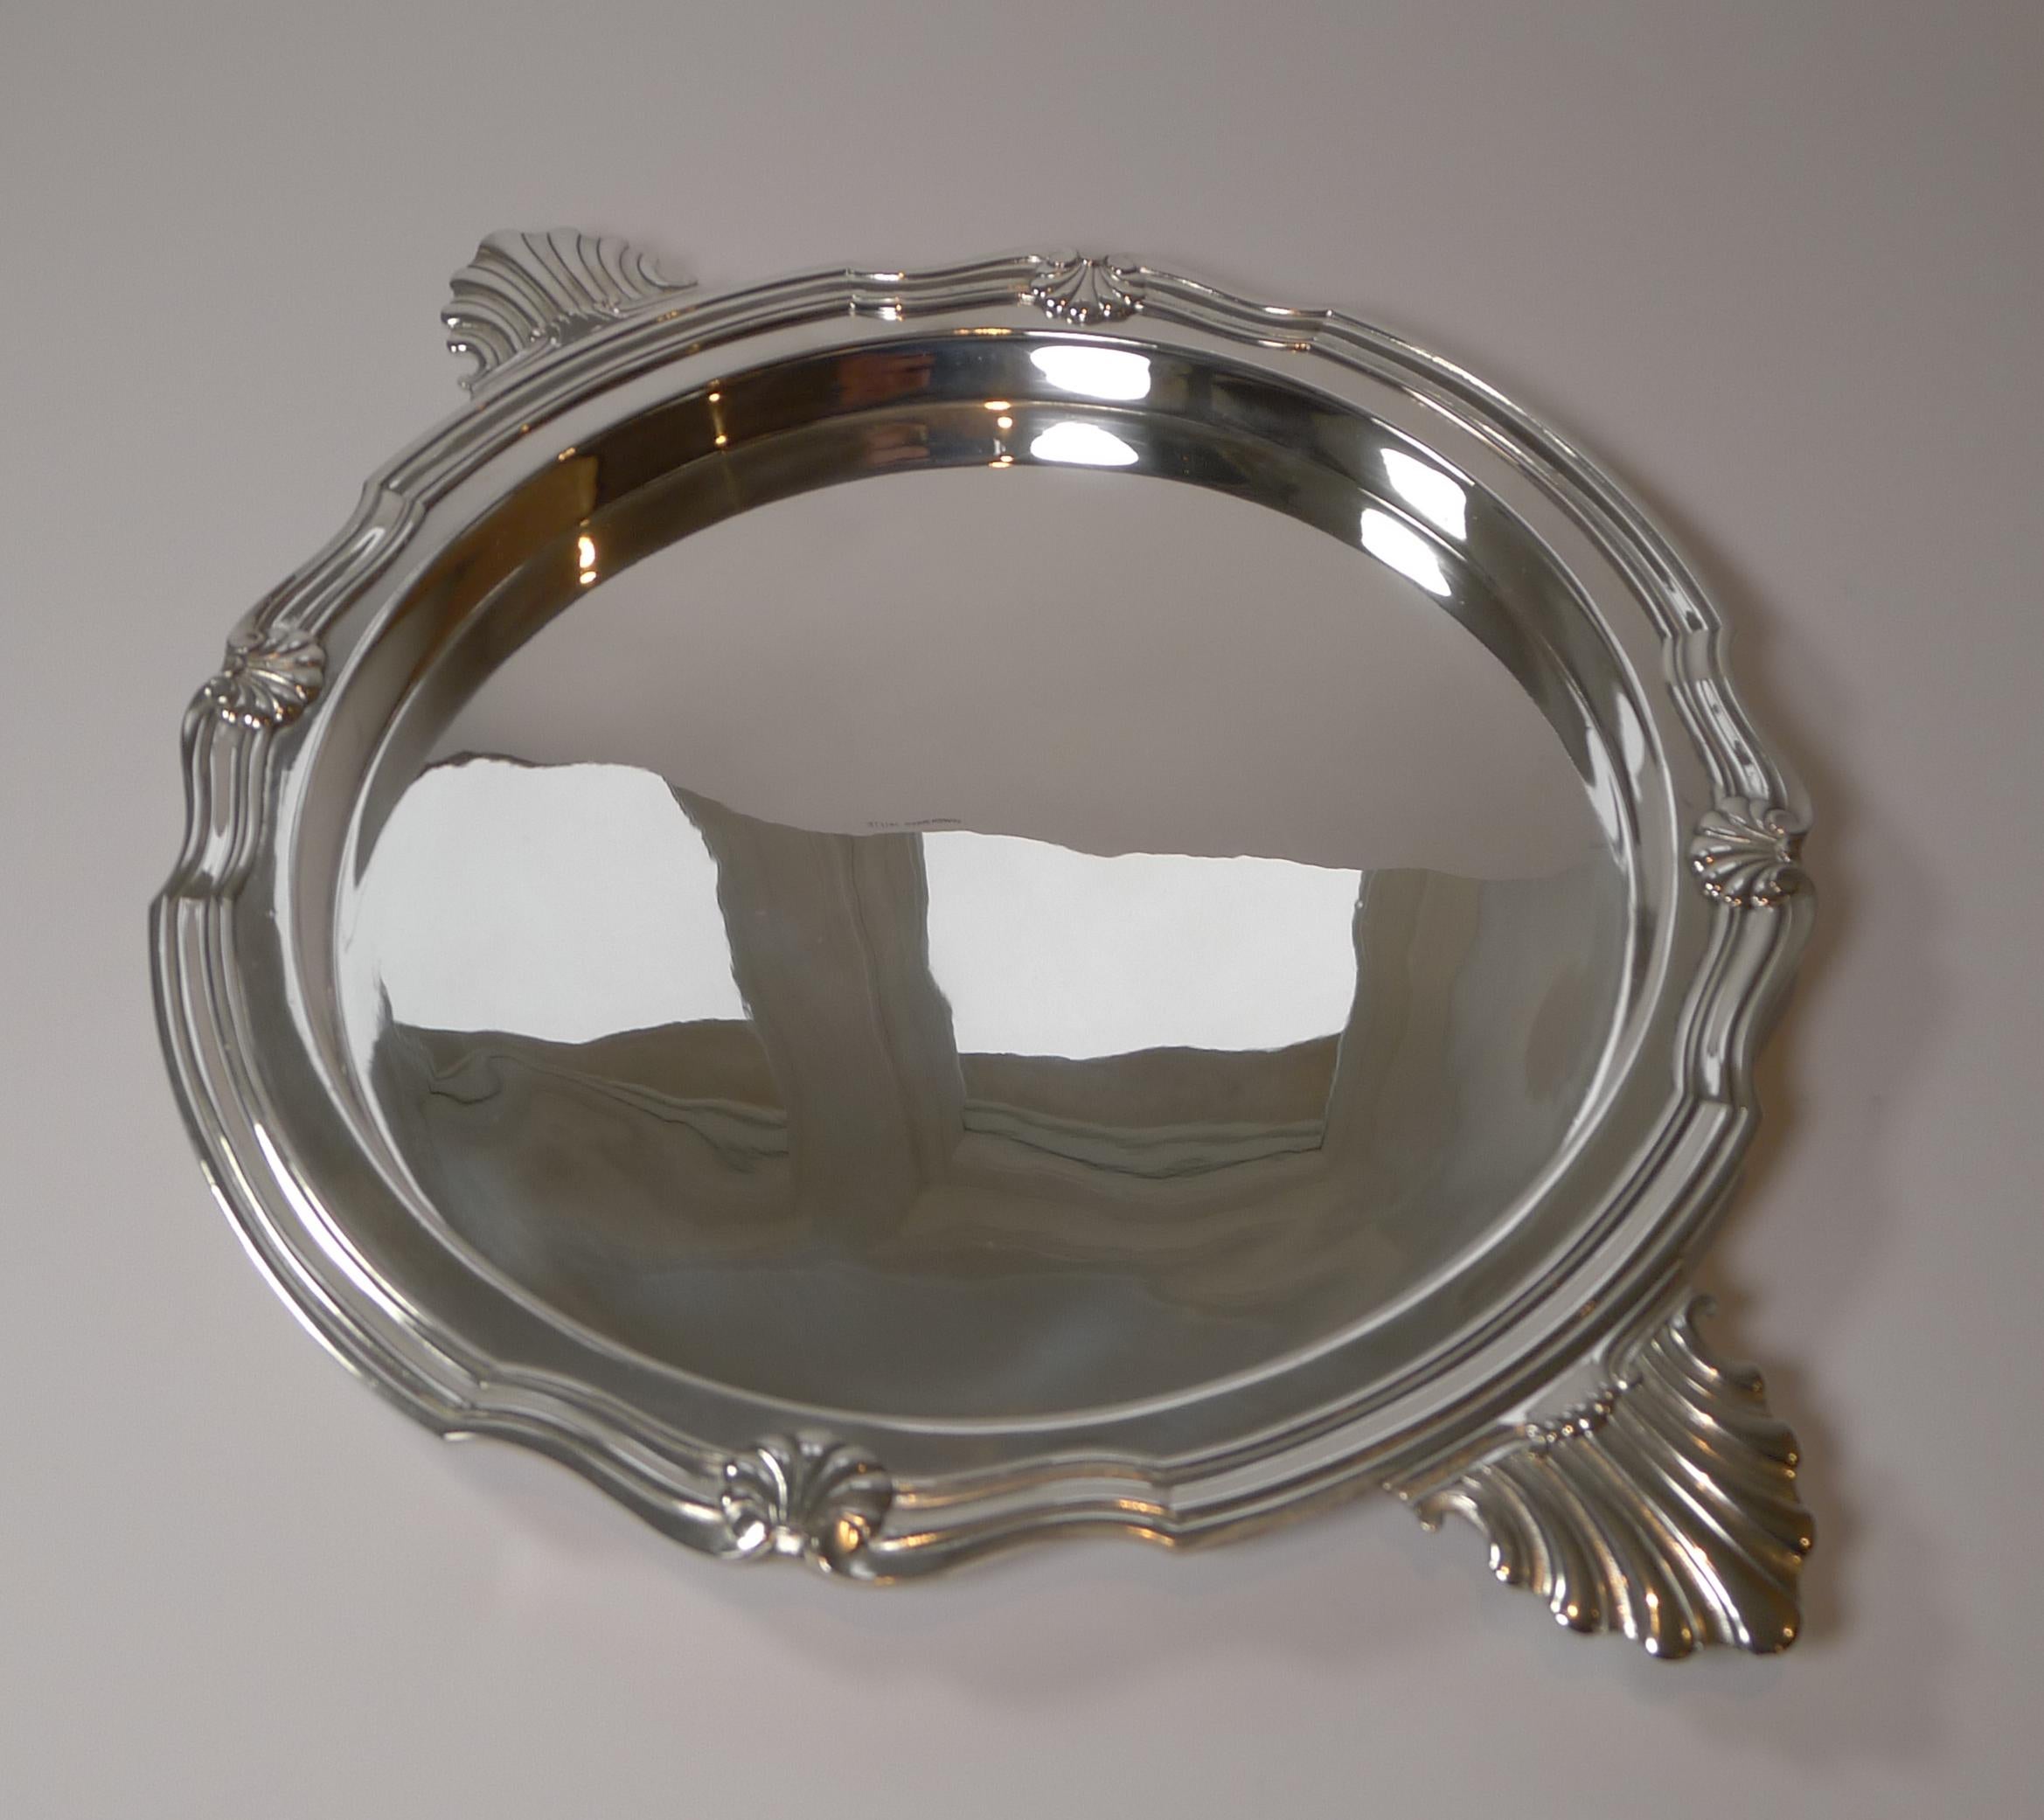 Art Nouveau French Silver Plated Cocktail or Serving Tray by Victor Saglier, Paris For Sale